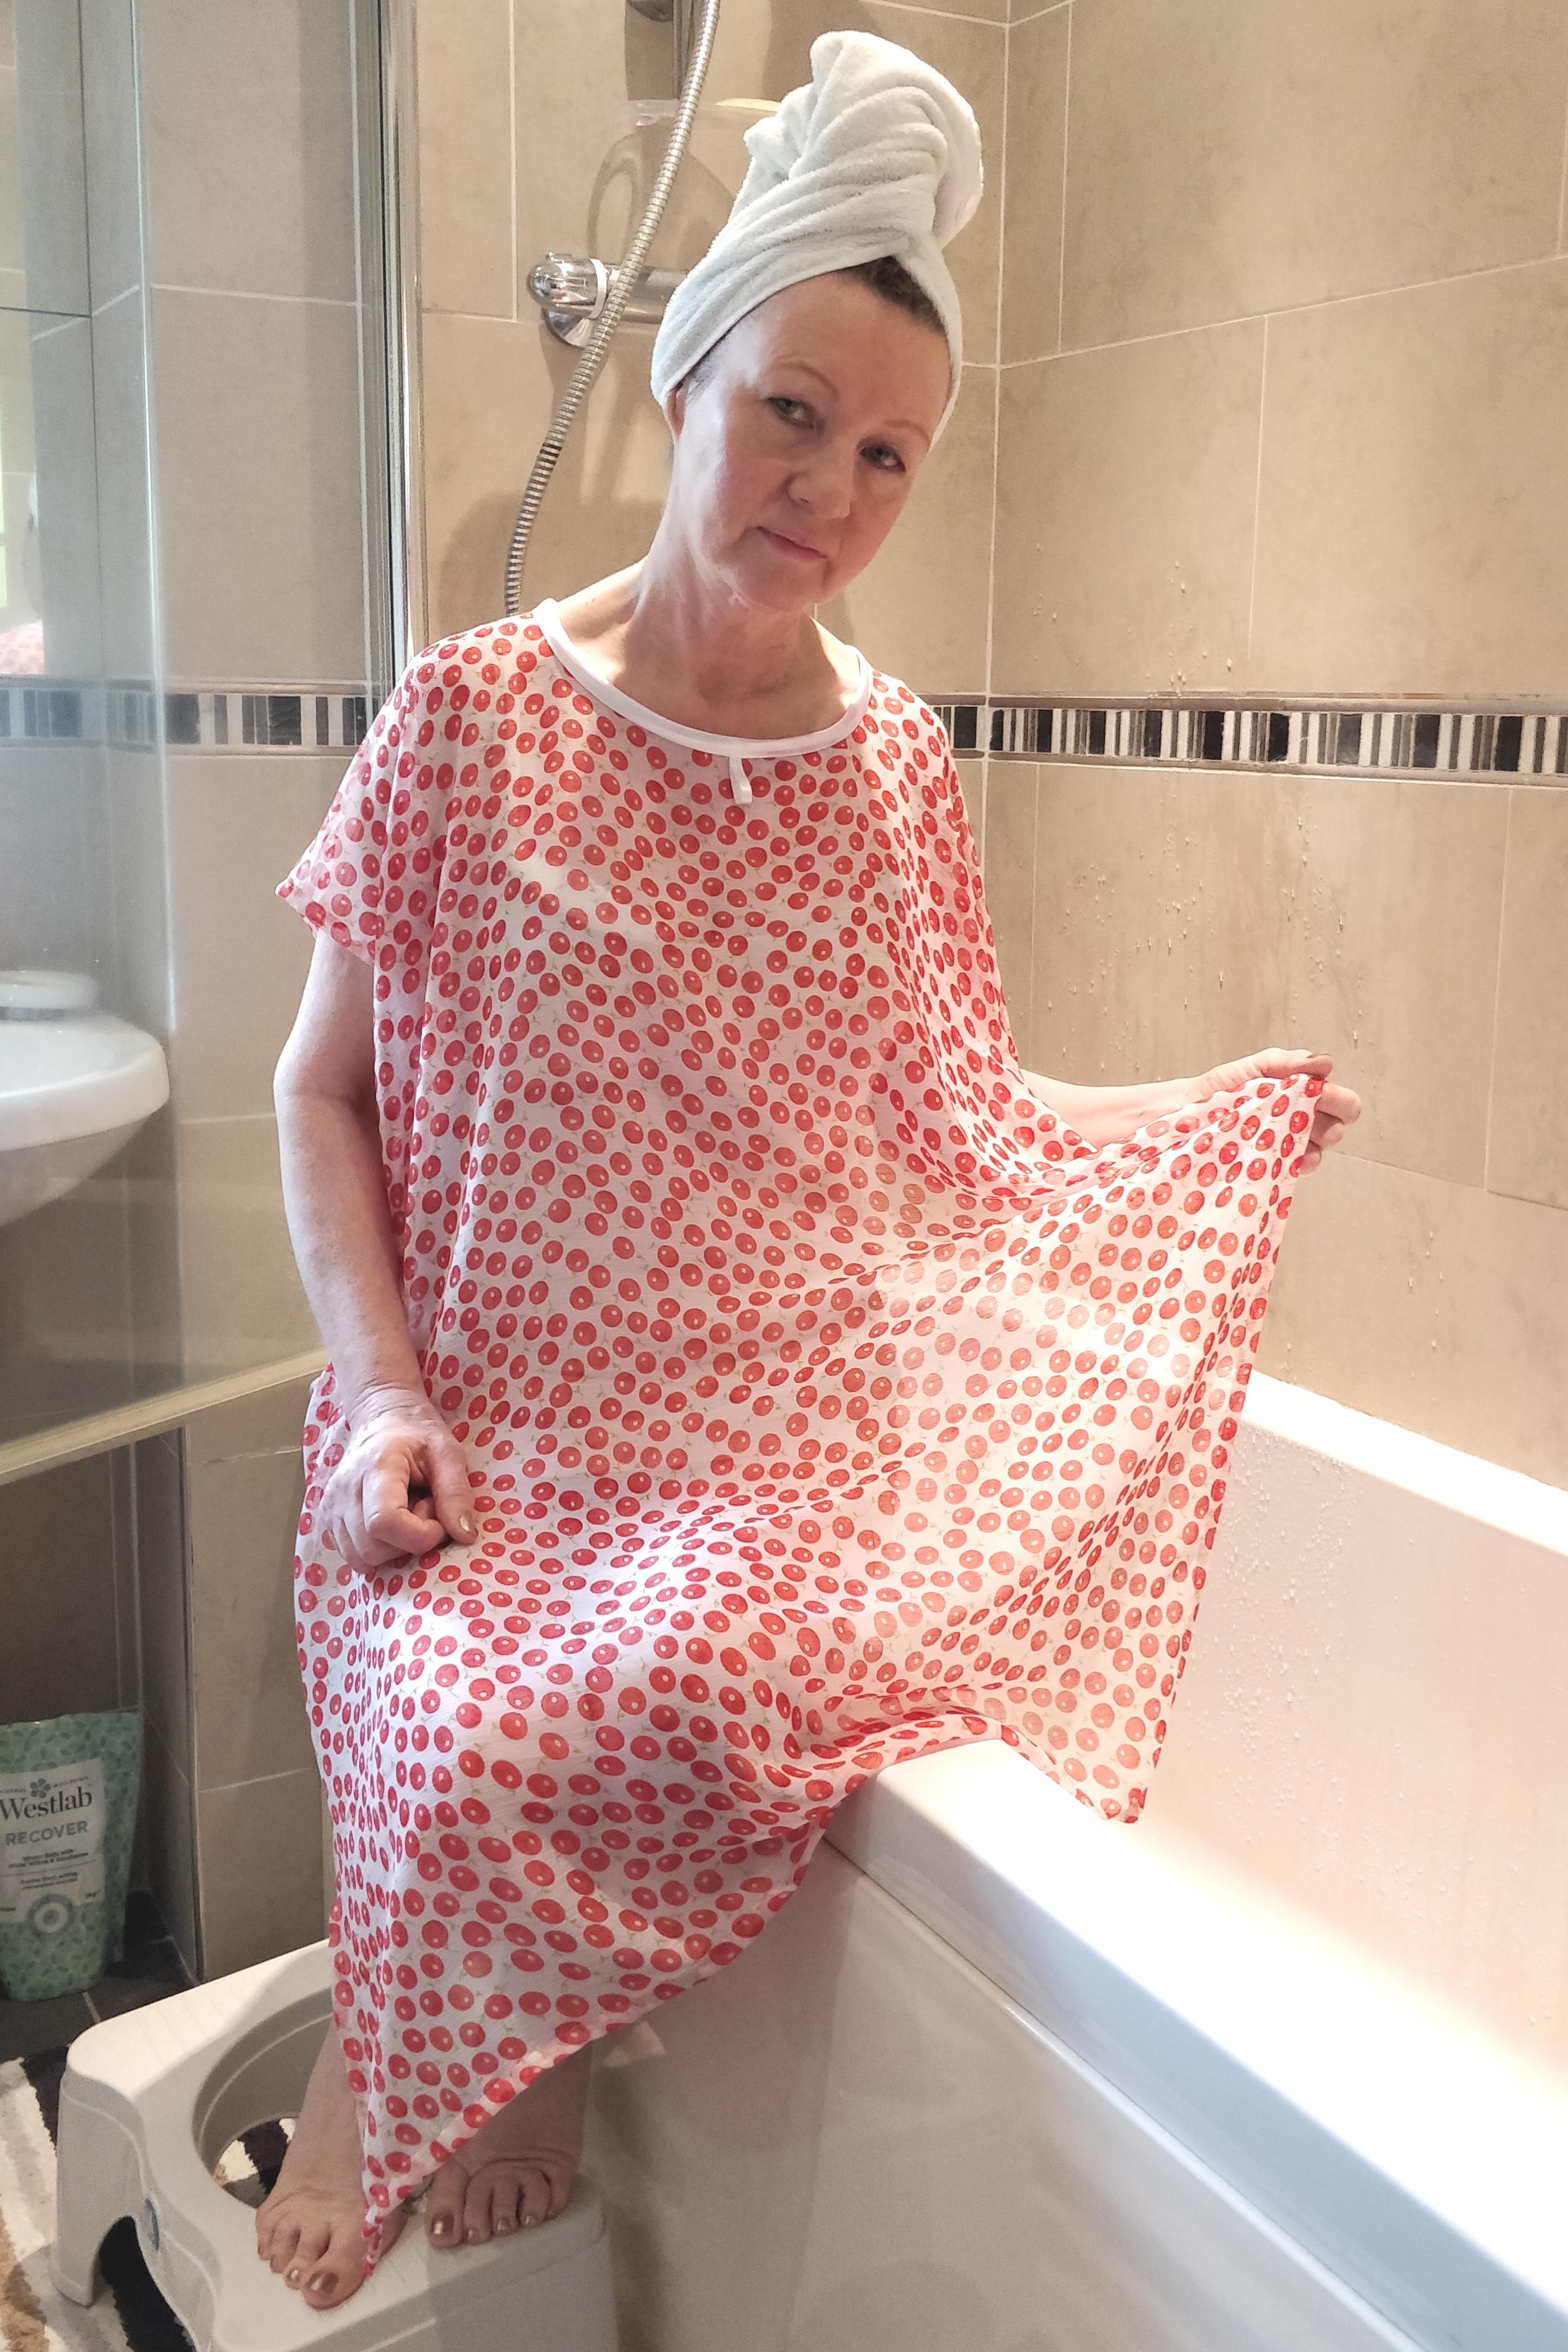 Soft Red NeverNaked(tm) Shower Drapron® to provide modesty, dignity and privacy whilst being helped to shower or bathe. Shower modesty wear. Bathing modesty gown. Lightweight crepe chiffon. Slips over shoulders - No sleeves. Magnetic fastening at back. Like a shower dress